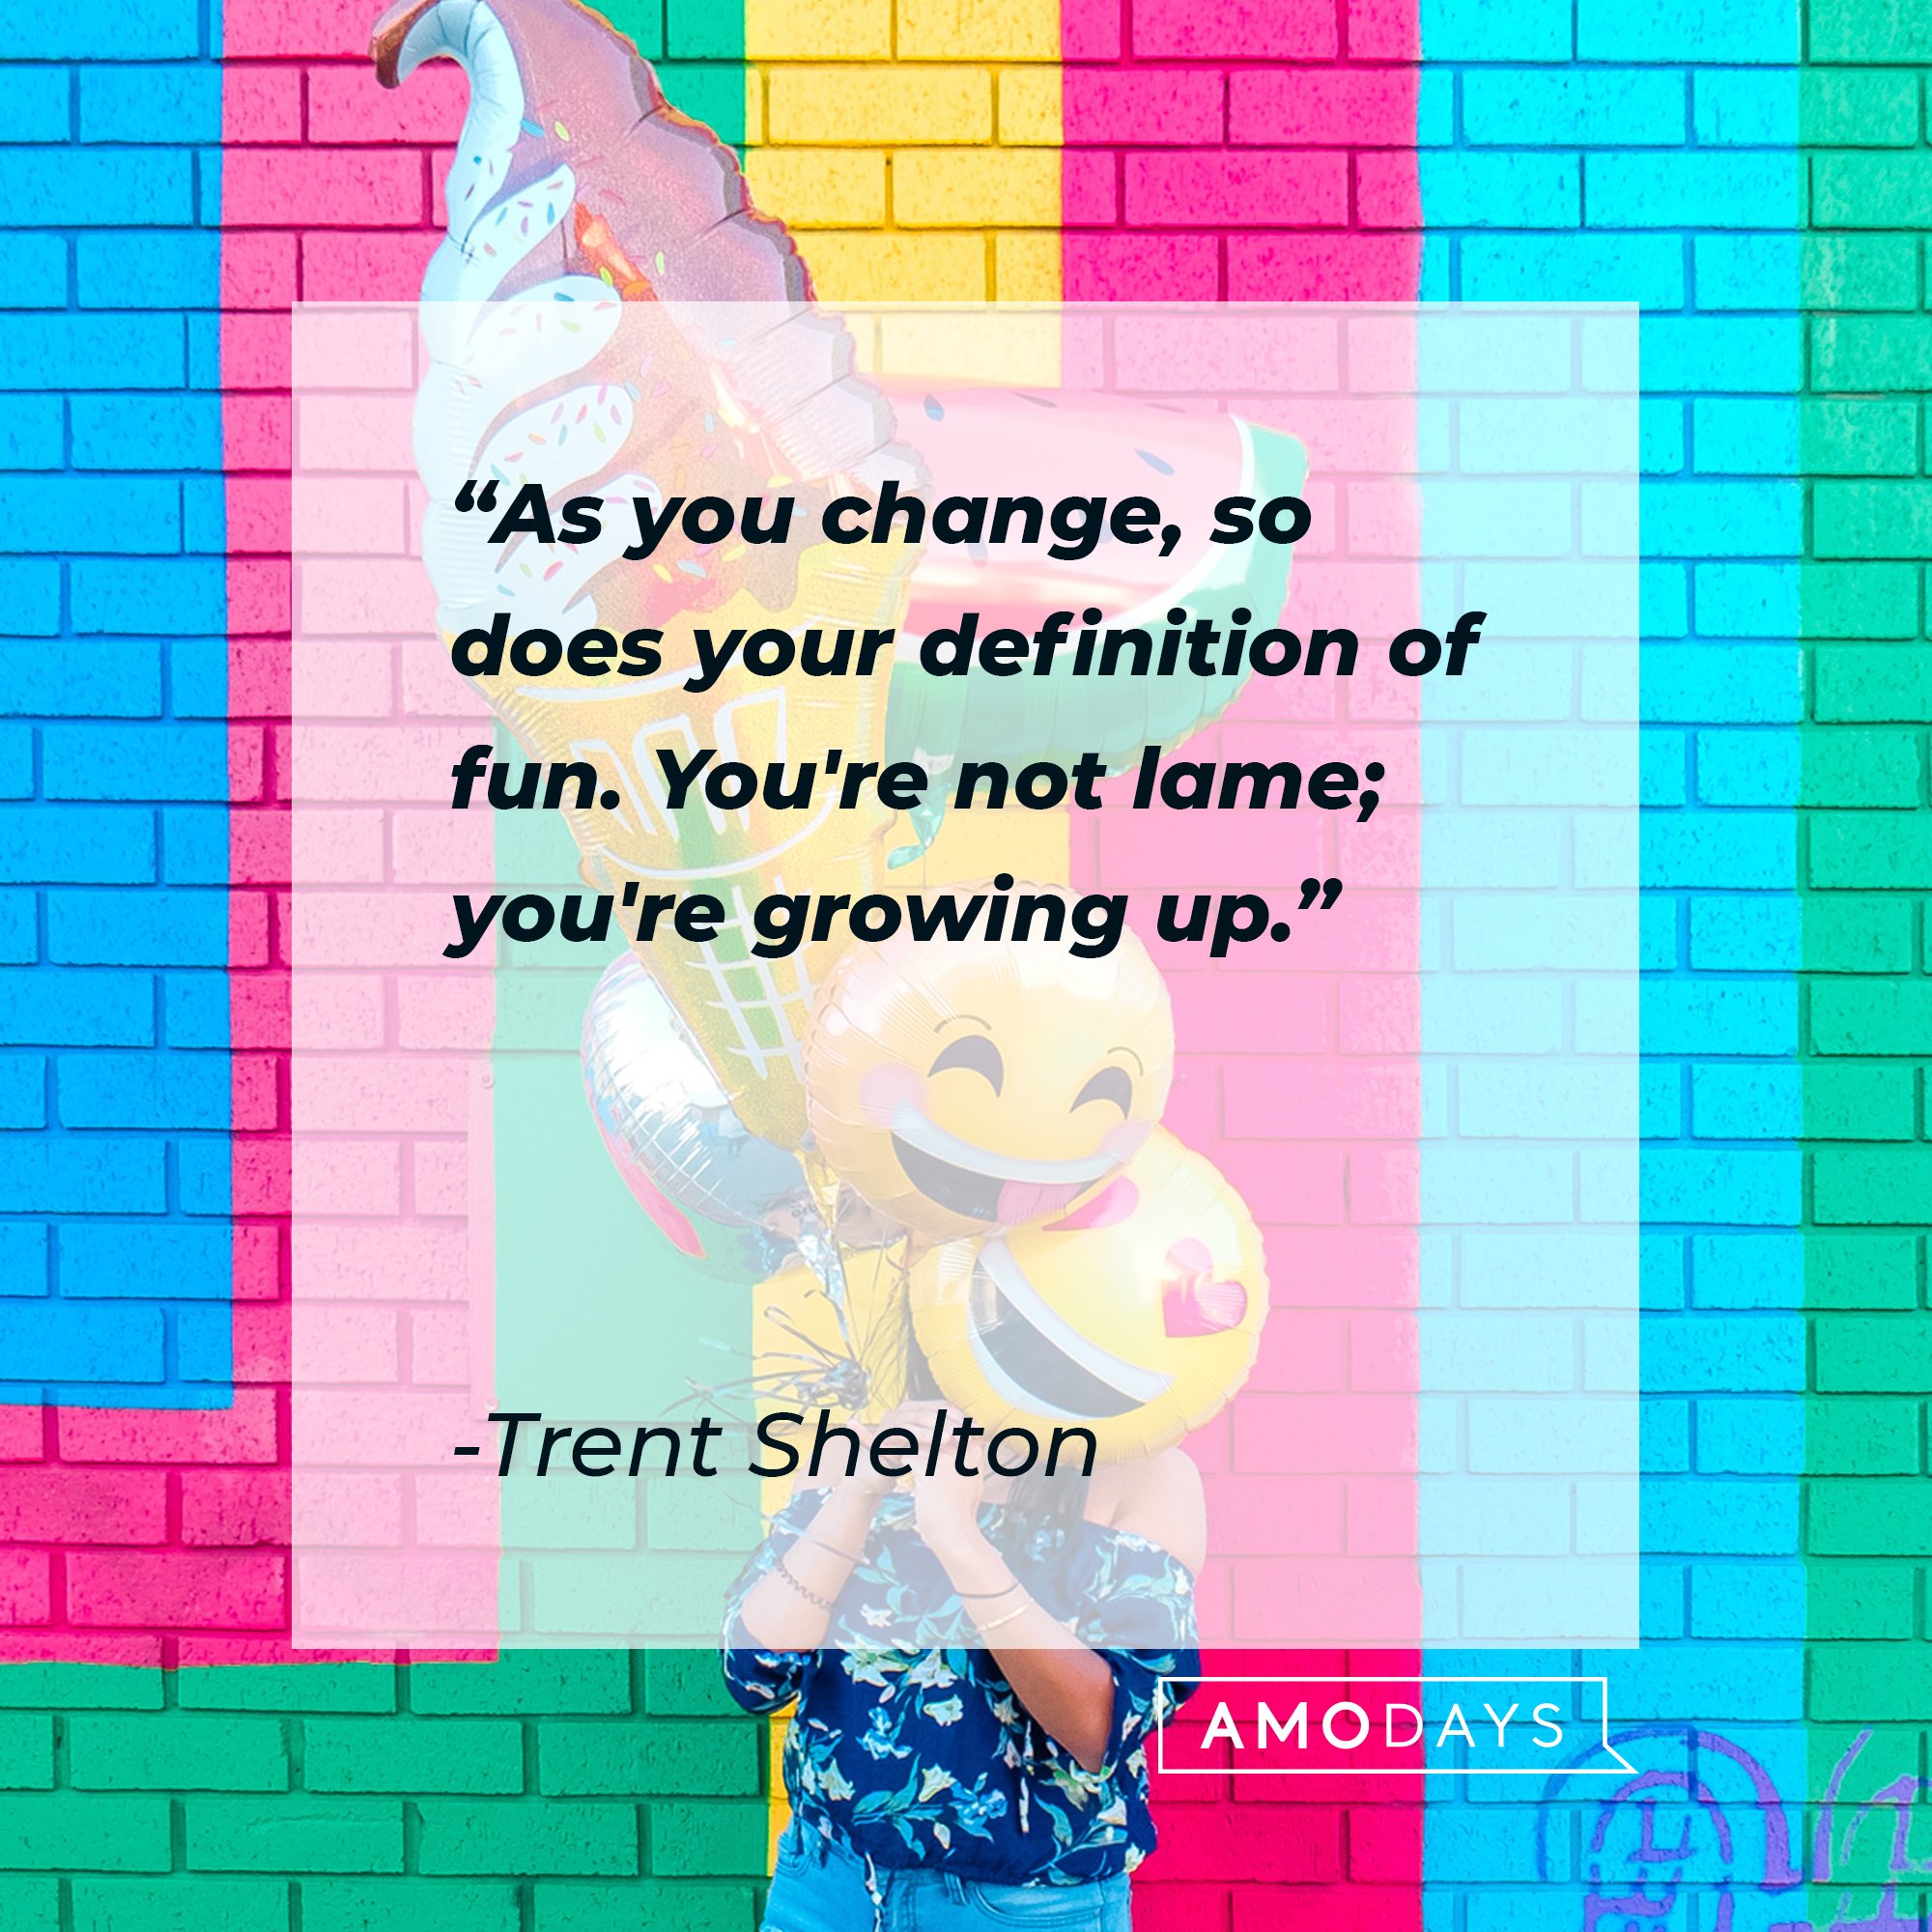  Trent Shelton's quote: "As you change, so does your definition of fun. You're not lame; you're growing up." | Image: AmoDays